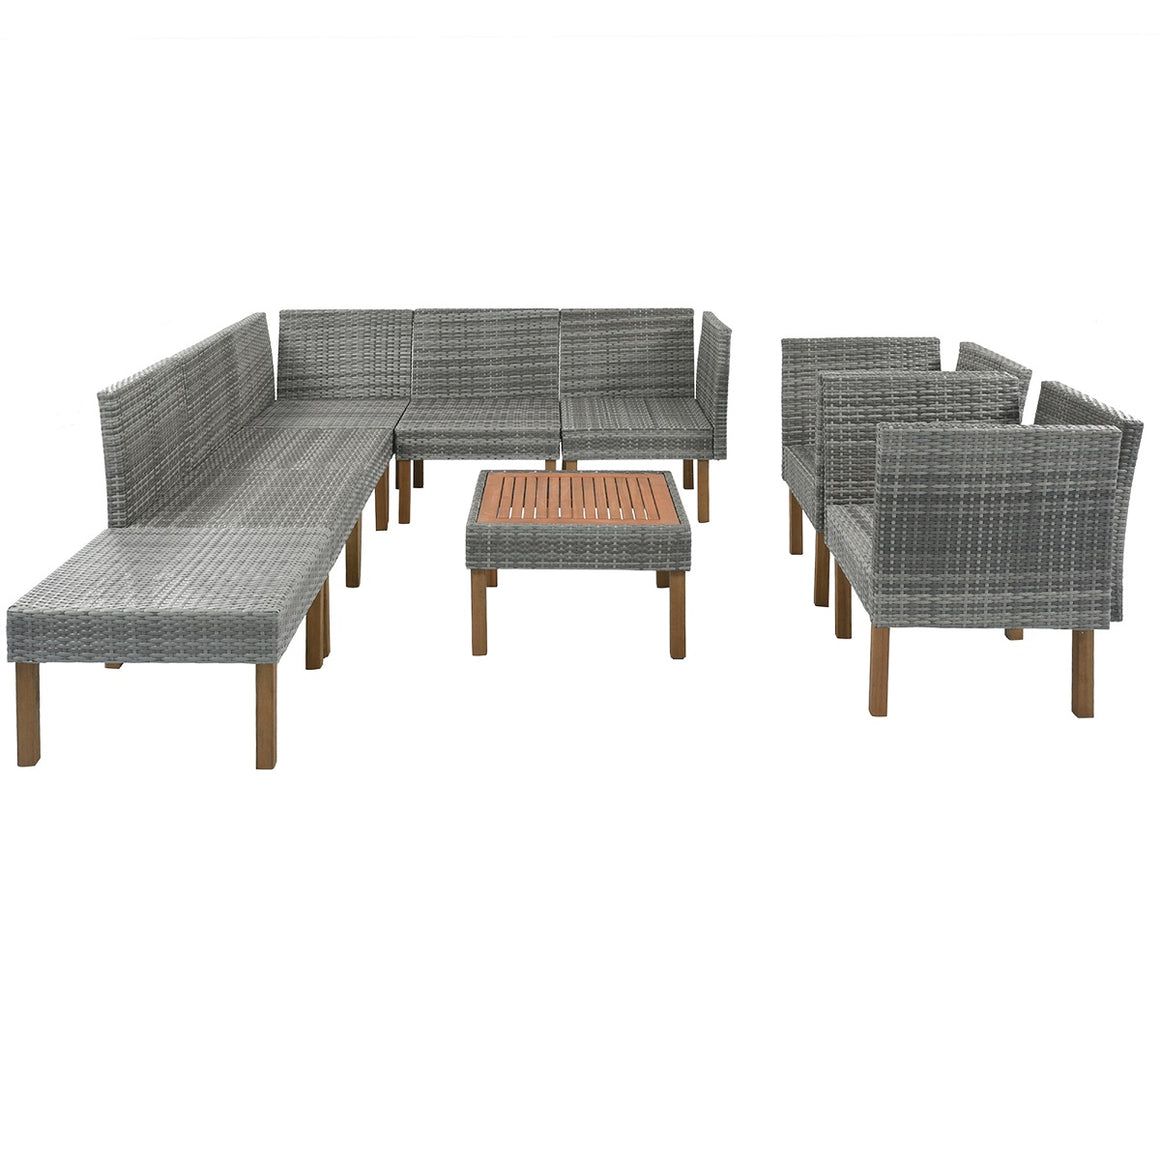 Fablise 9-Piece Outdoor Patio Garden Wicker Sofa Set with Armchairs with Grey Cushions and Acacia Wood Tabletop